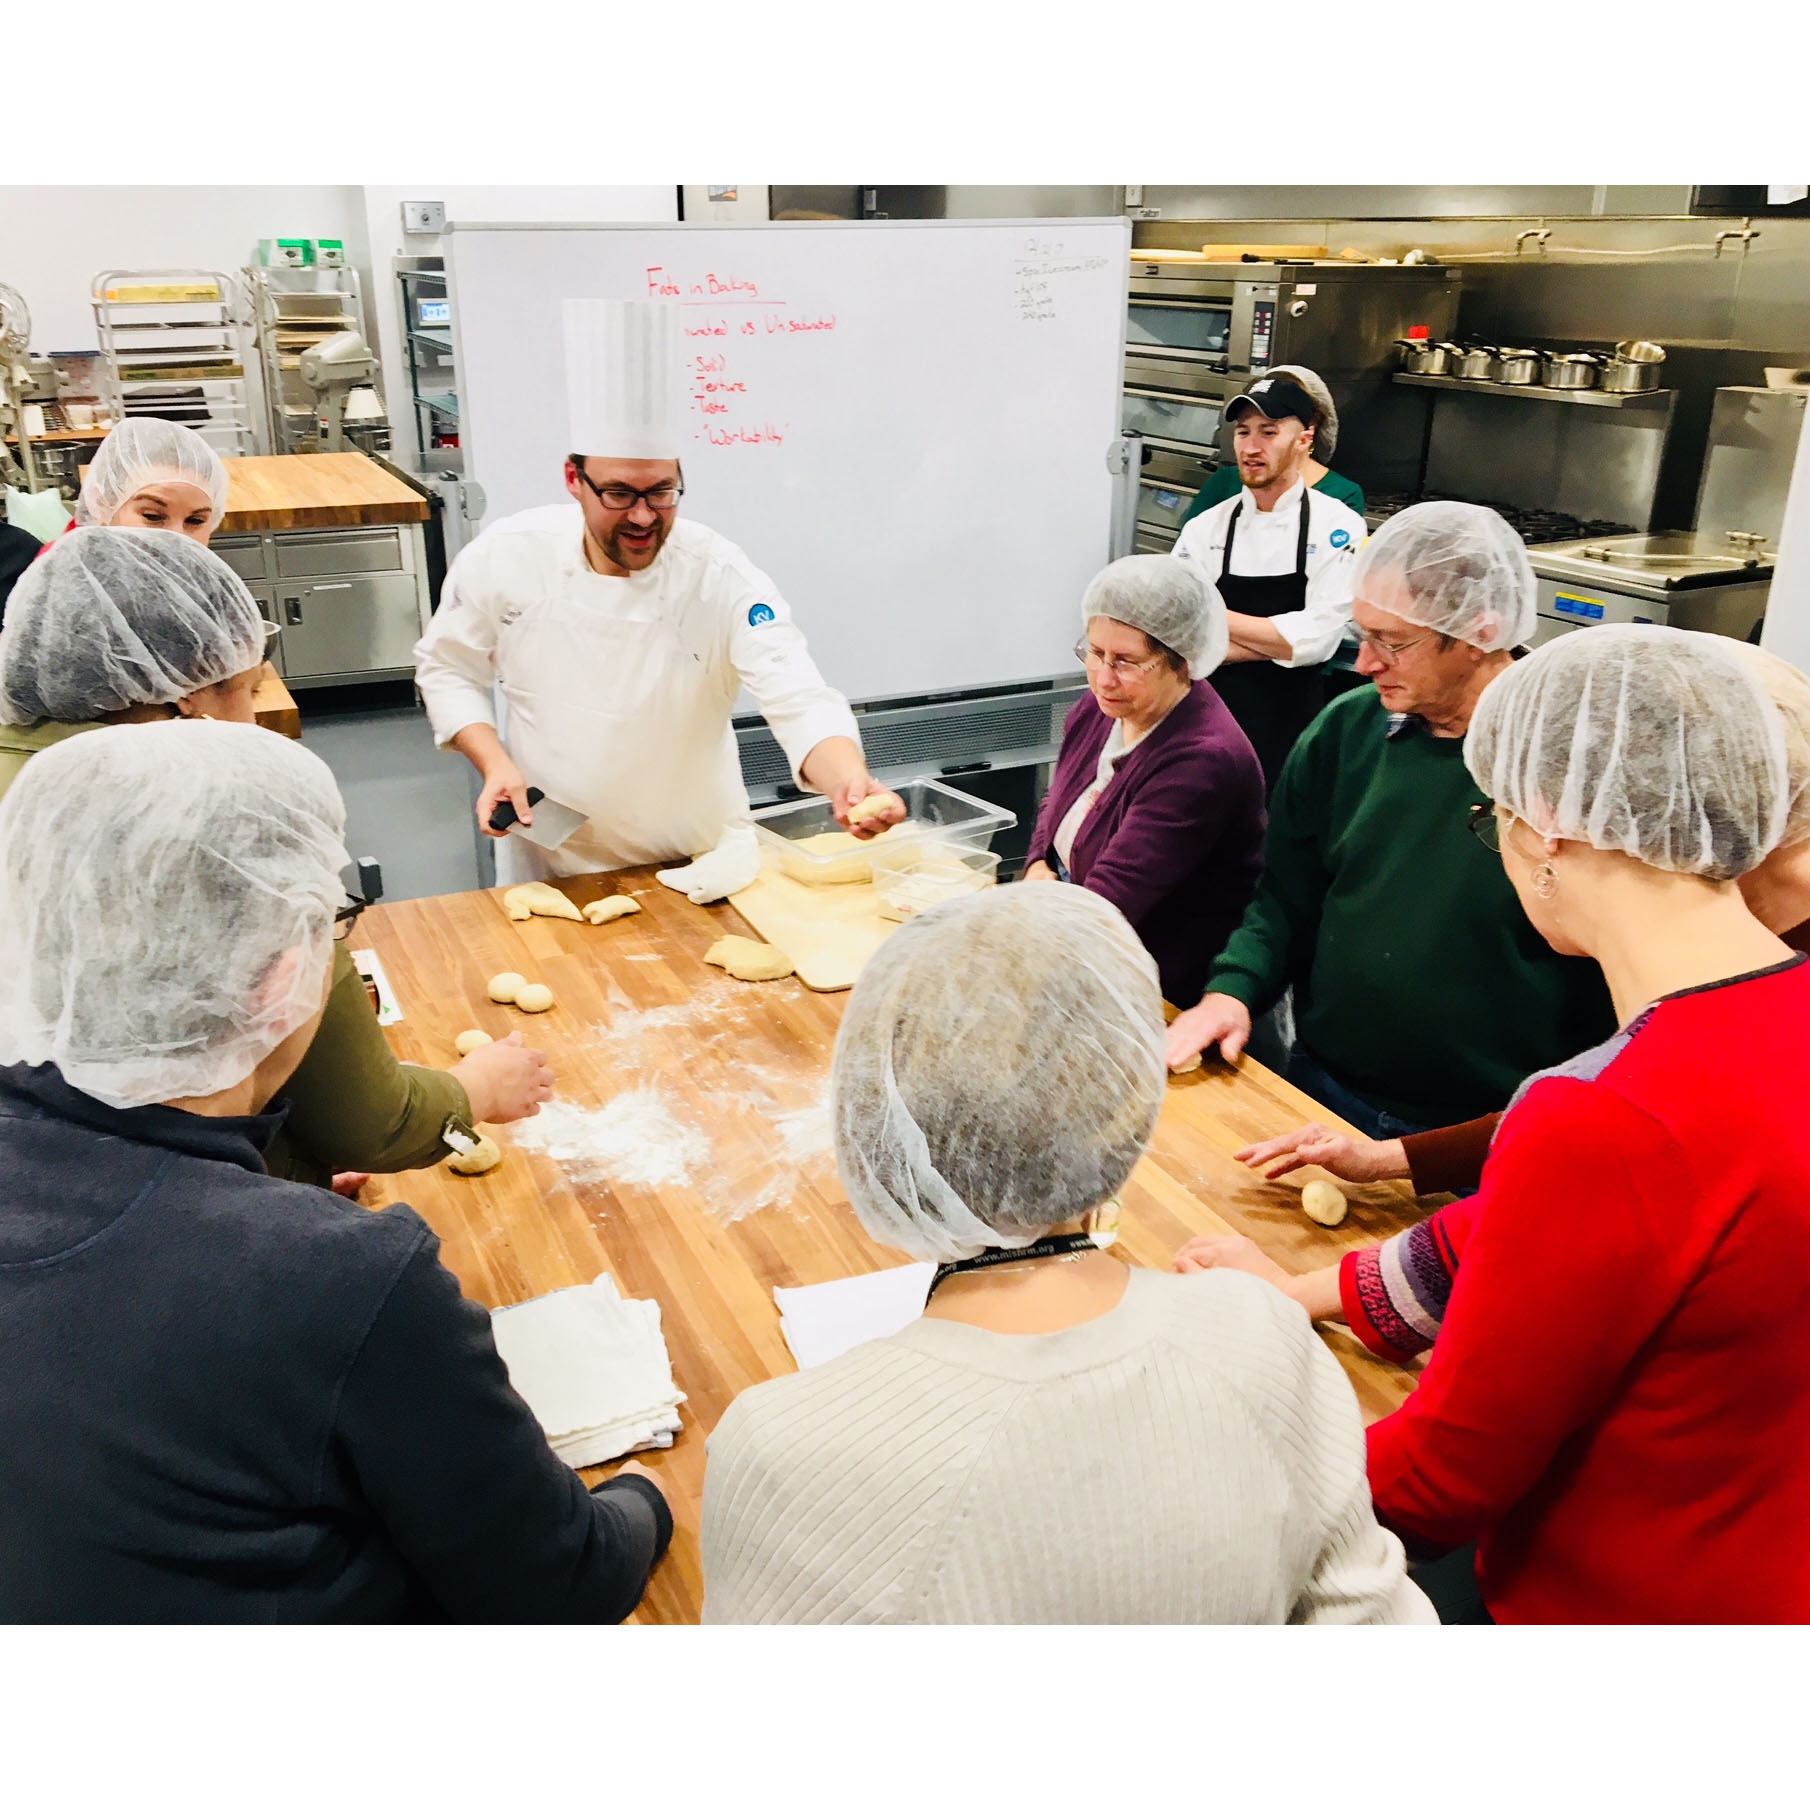 A culinary instructor leads a class in a learning kitchen.